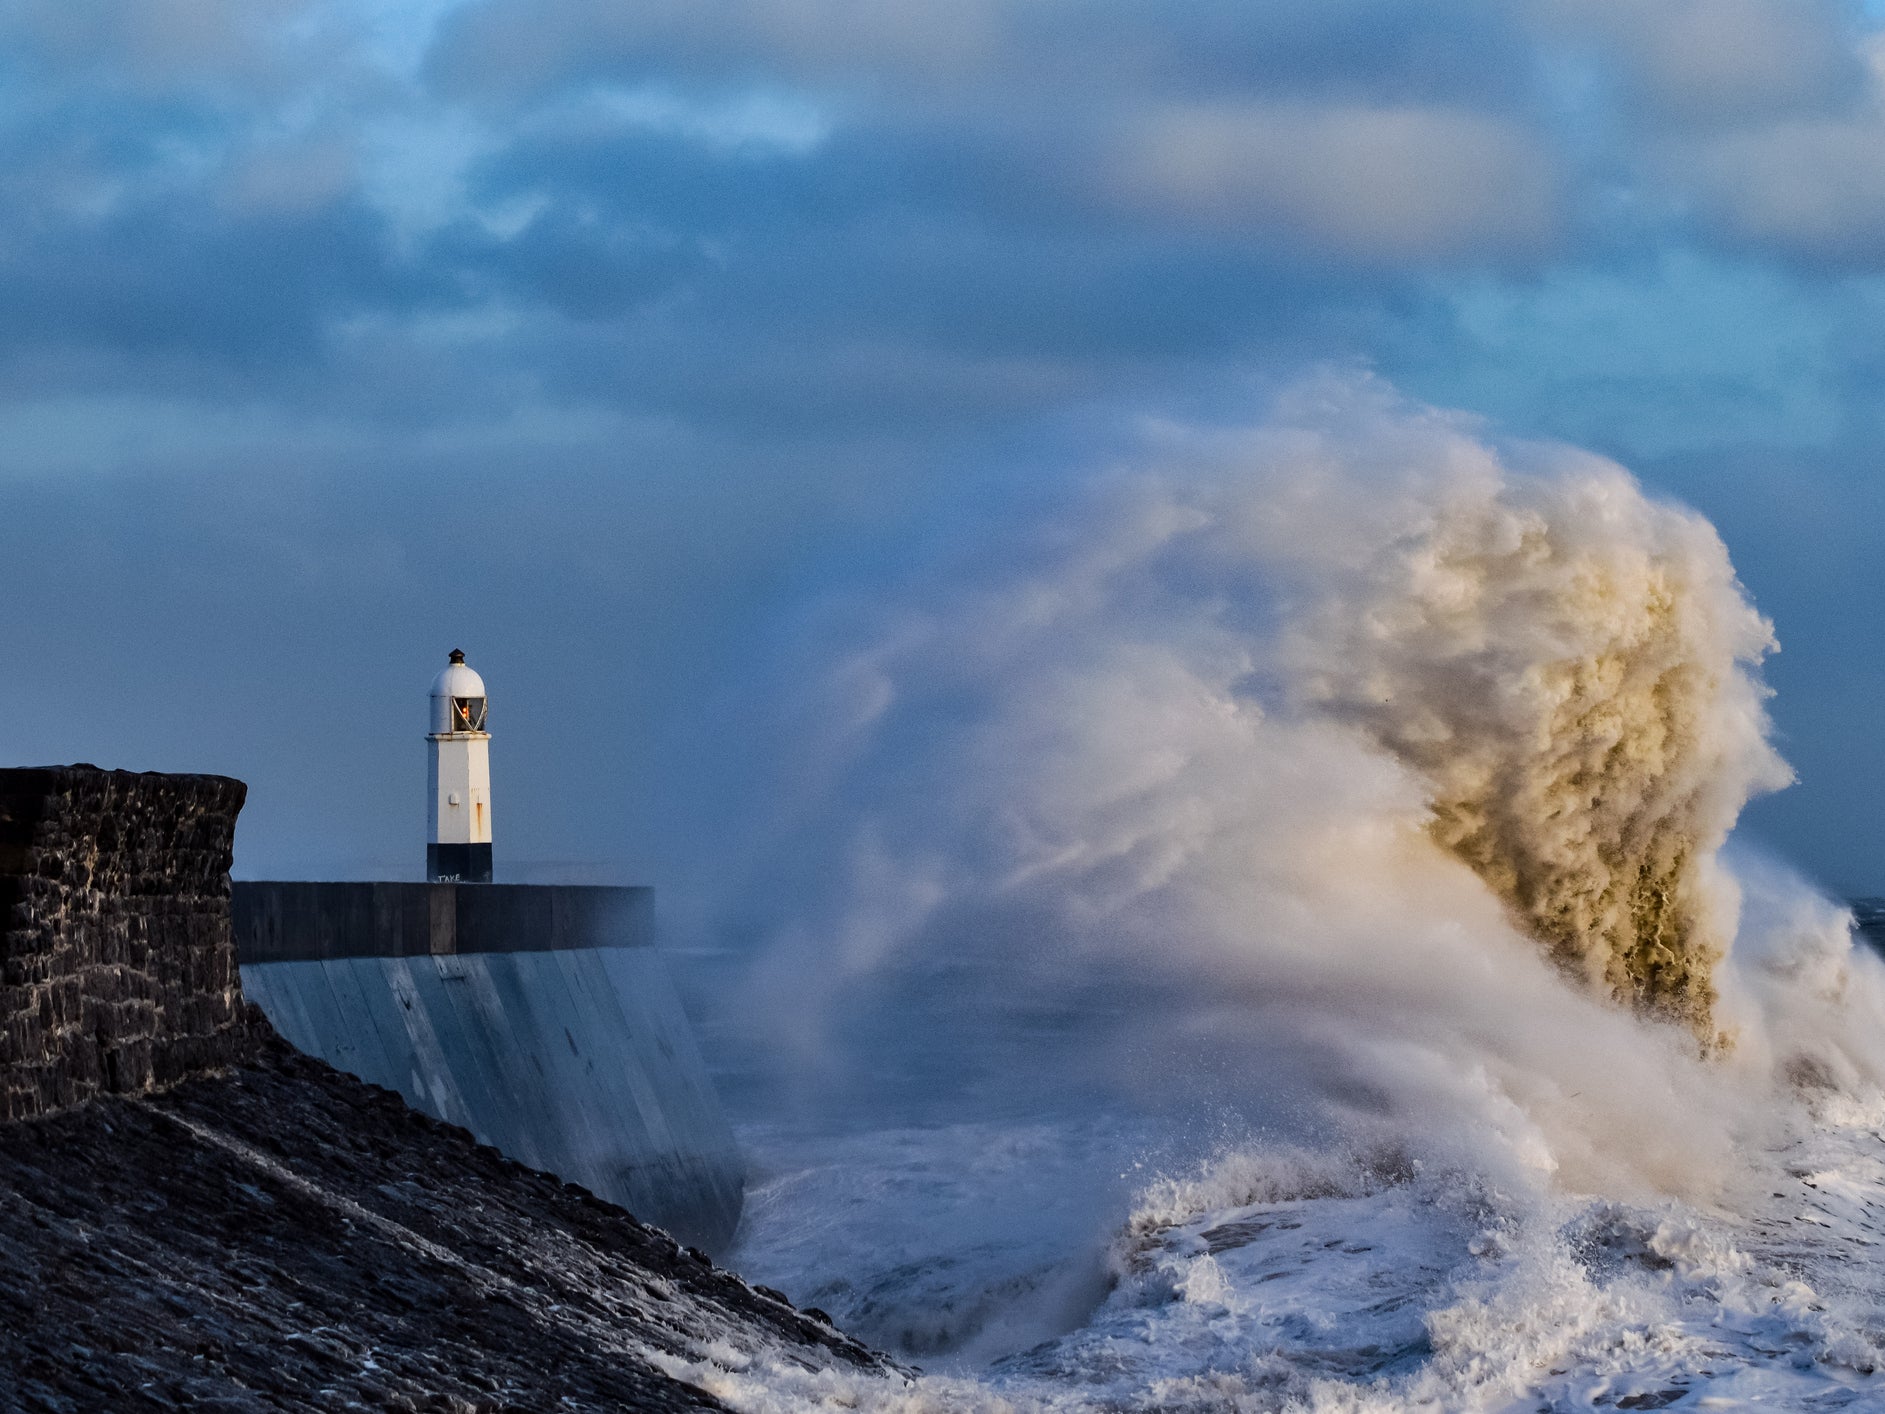 Huge waves from Storm Freya lash the Welsh coast at Porthcawl in March 2020